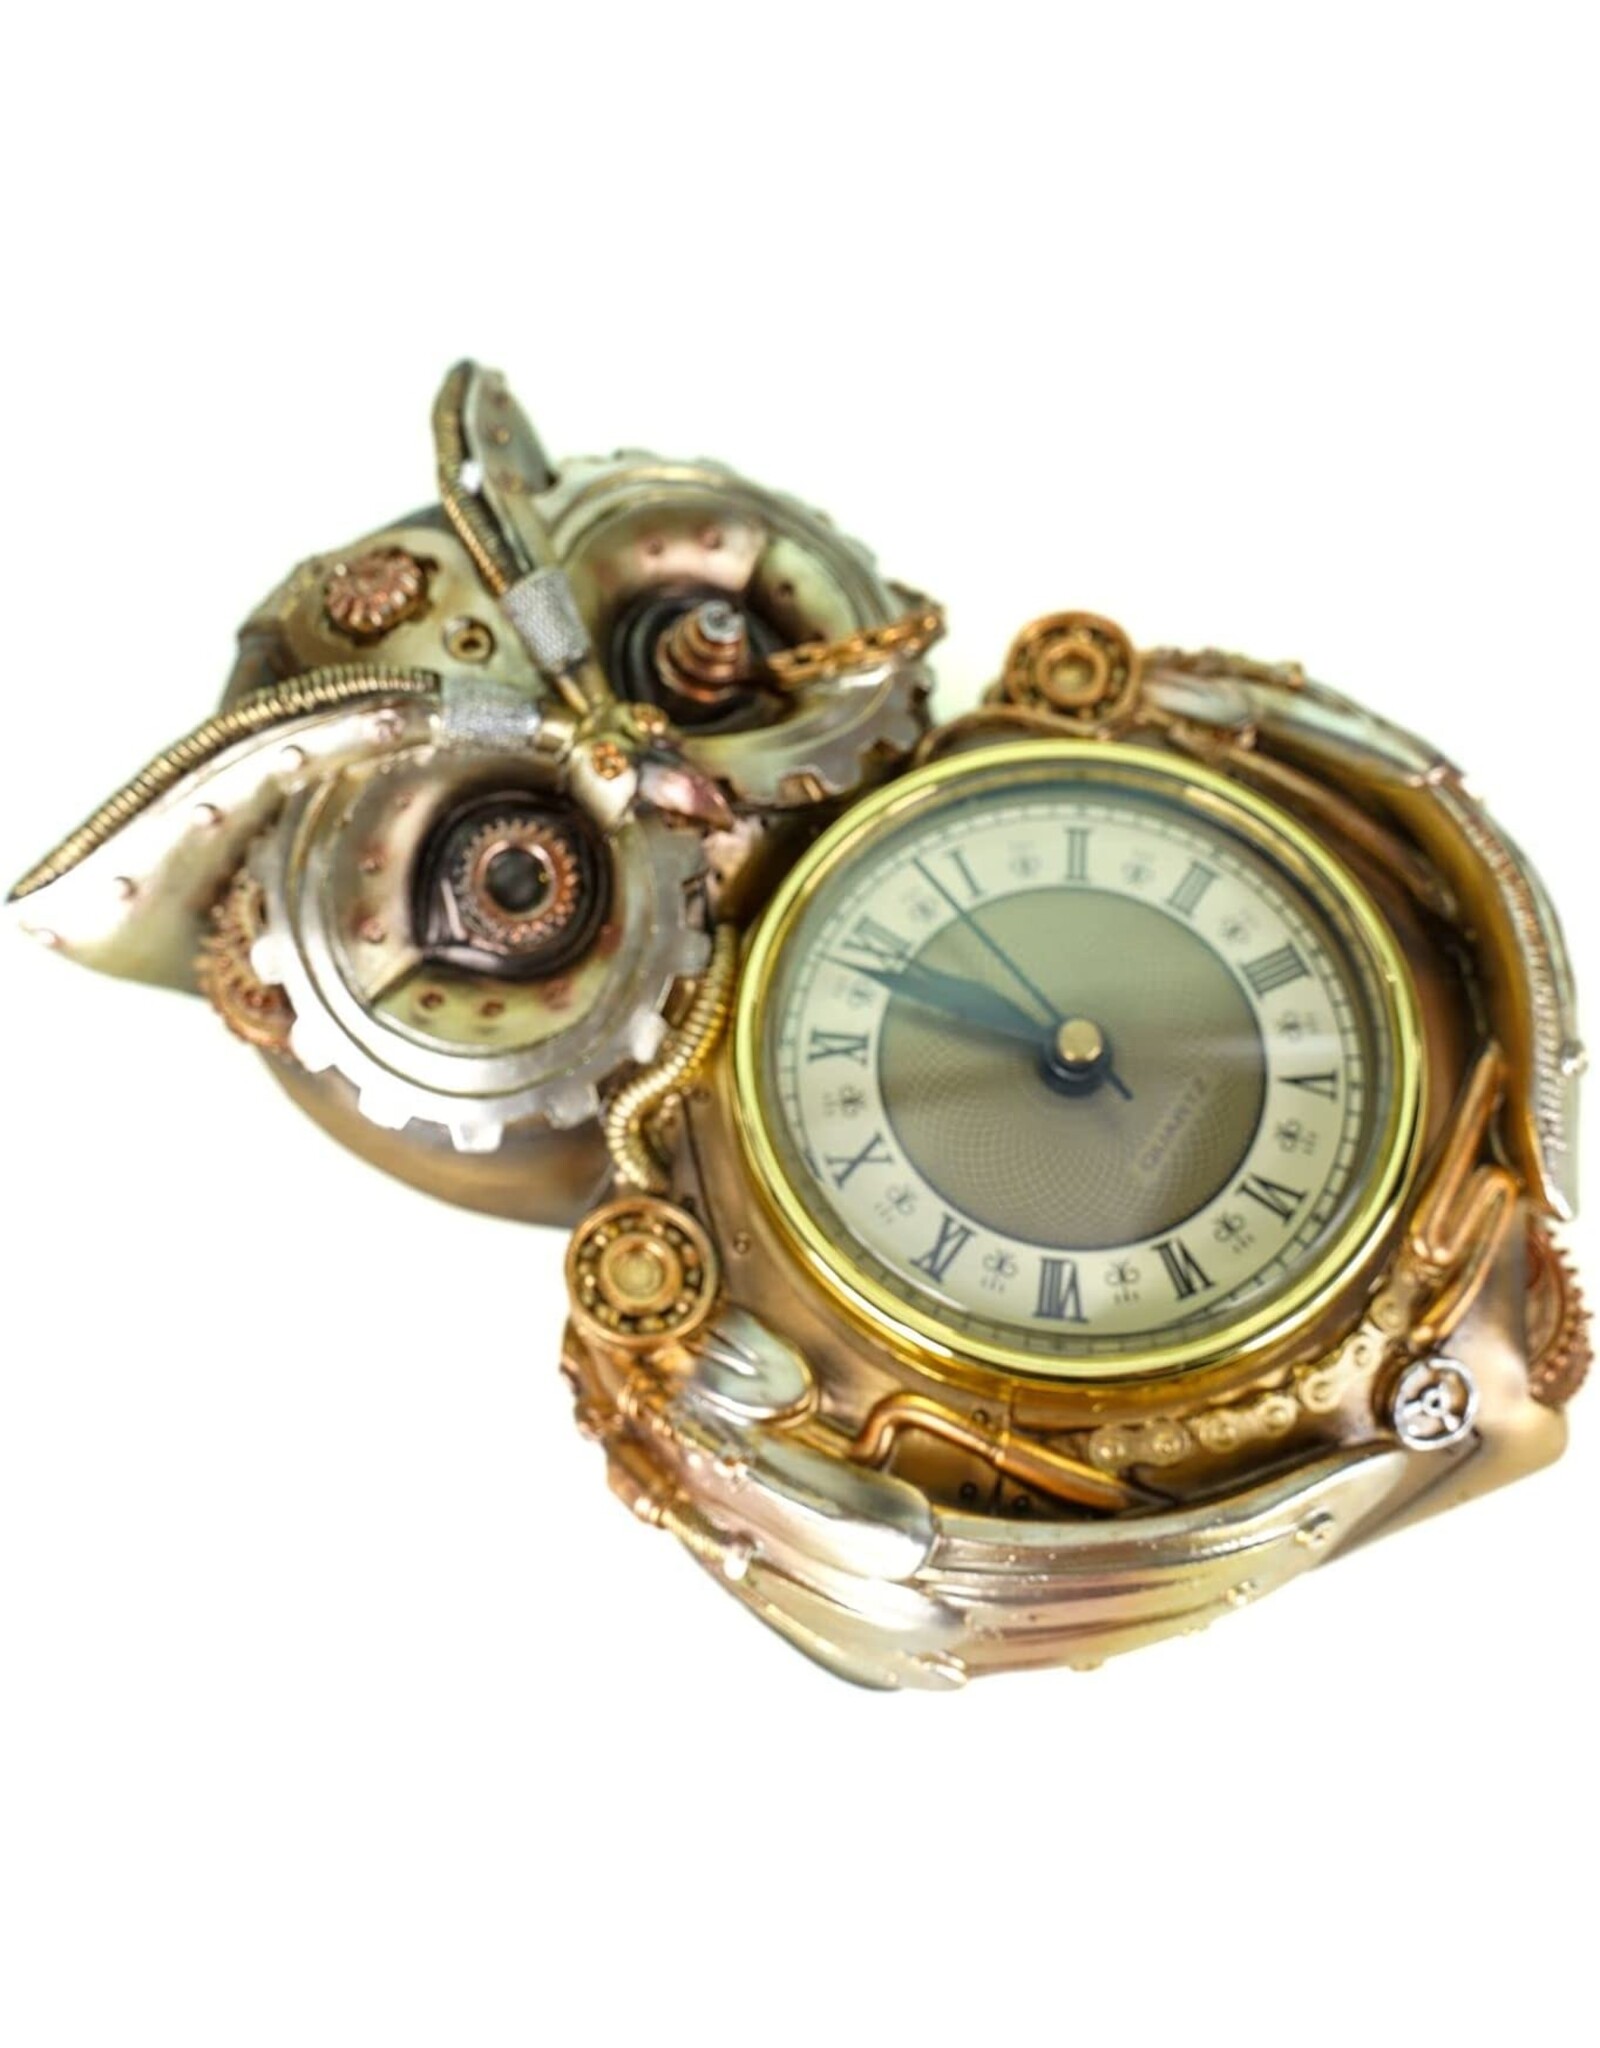 VG Giftware and Collectables - Steampunk Owl Wall Clock